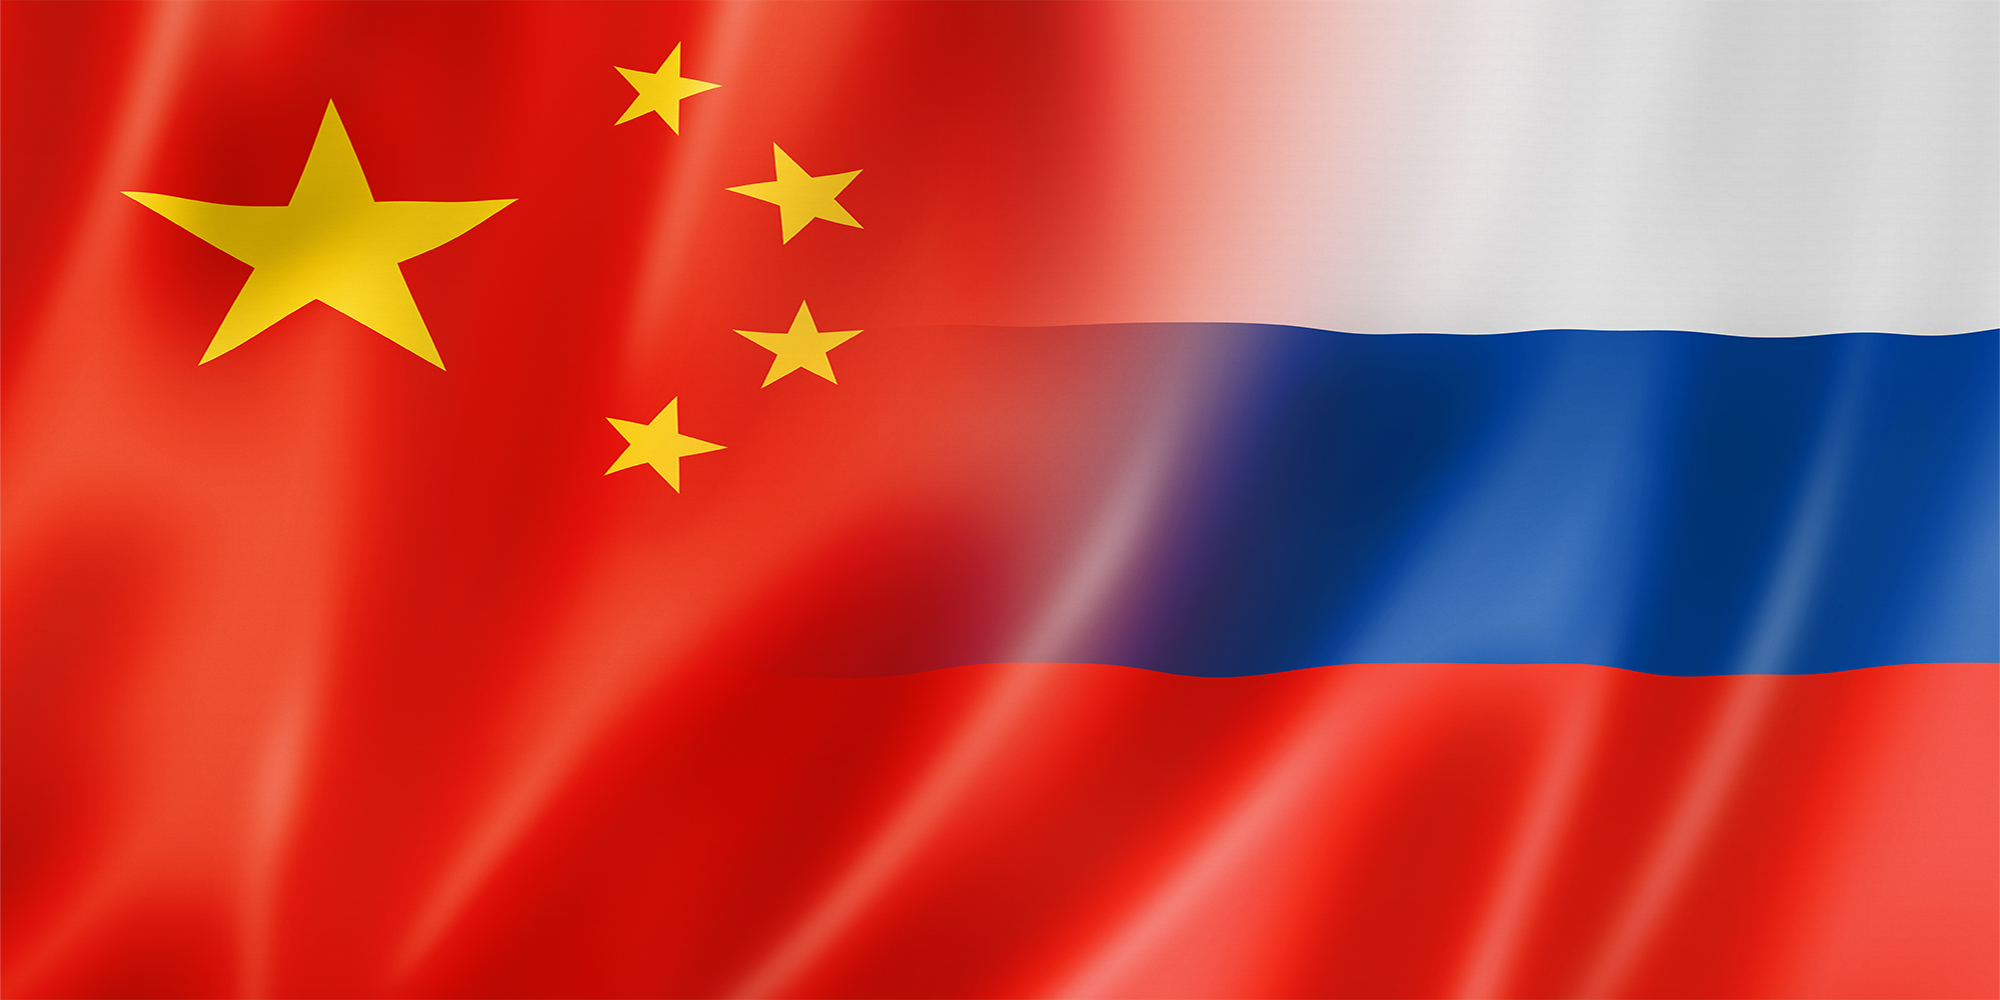 Chinese & Russian flags